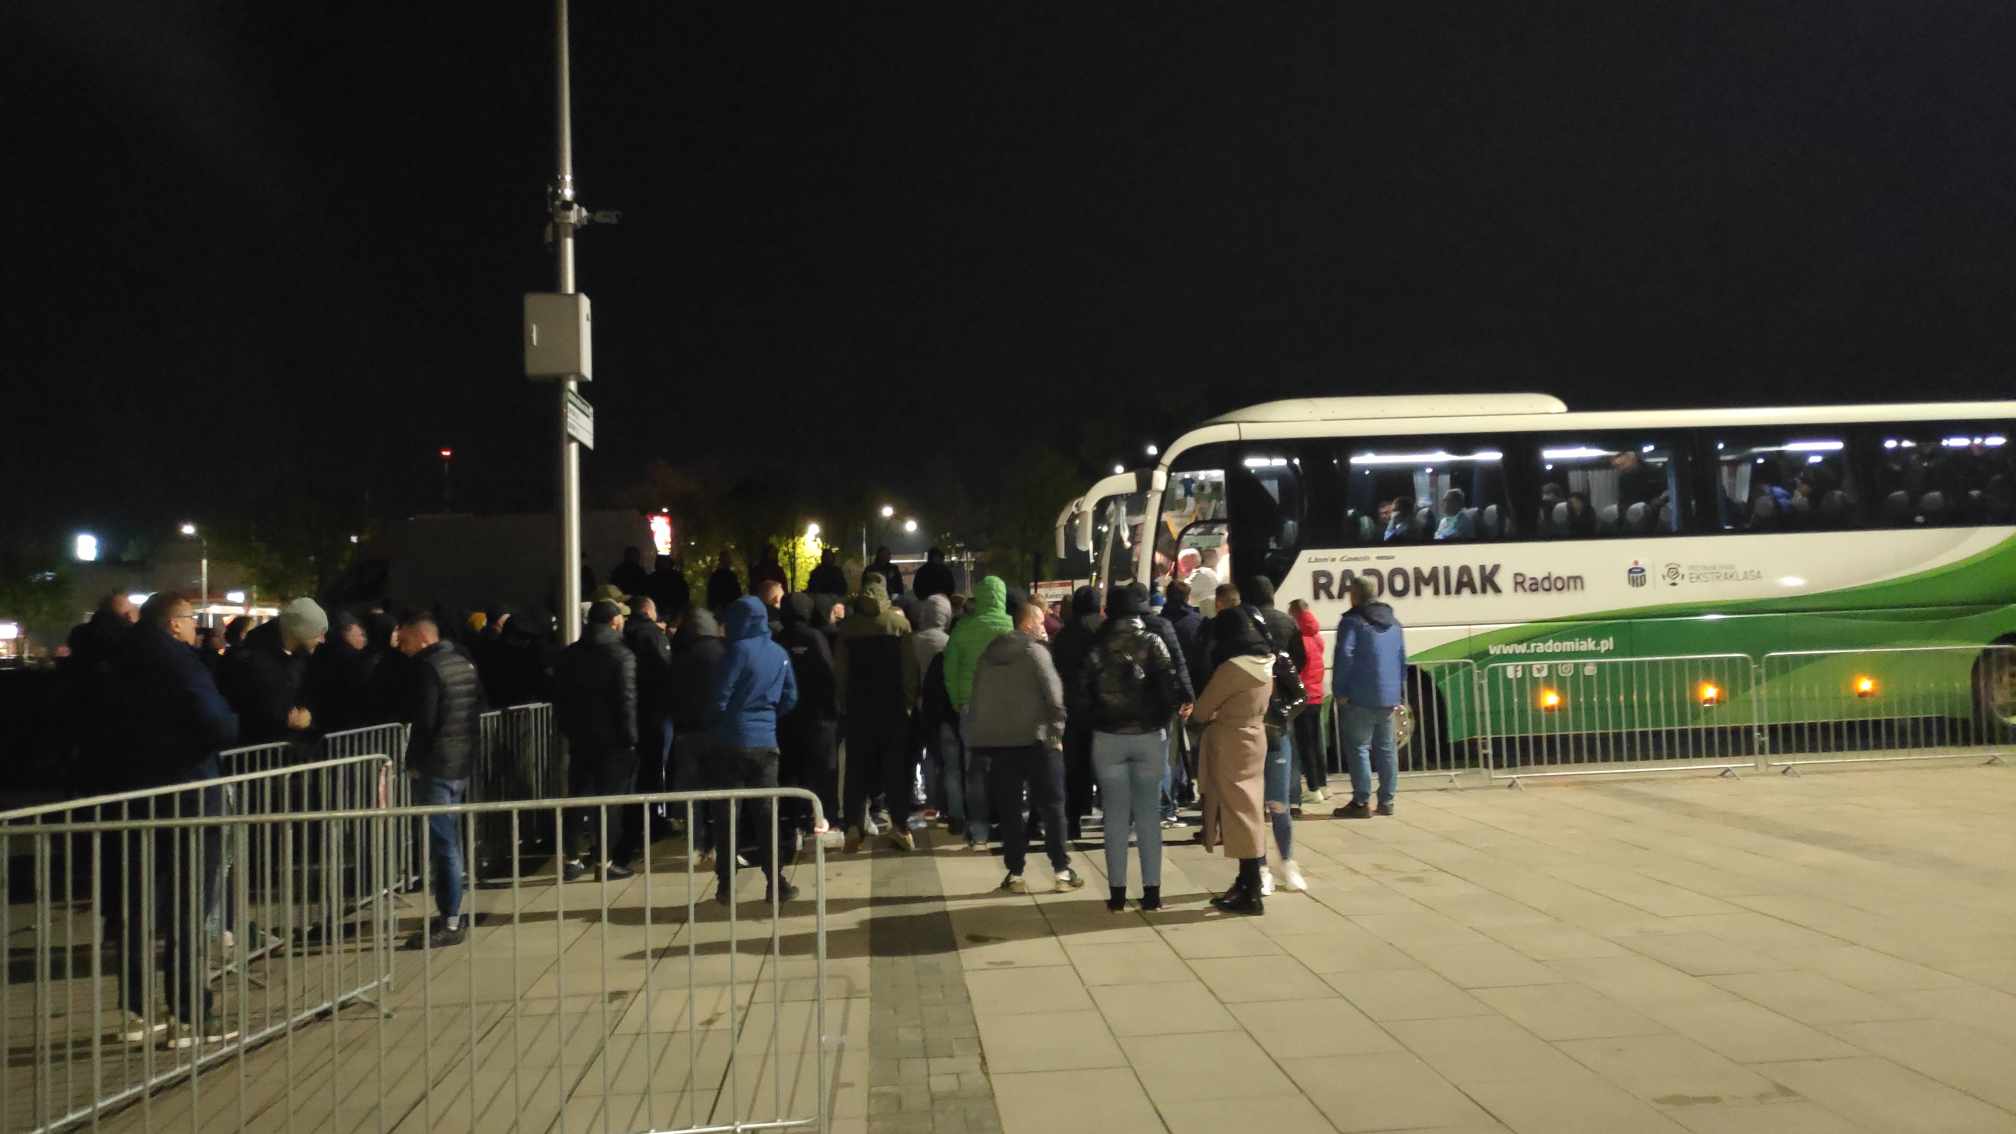 Radomiac fans welcomed the players after the derby loss.  “We've had enough”